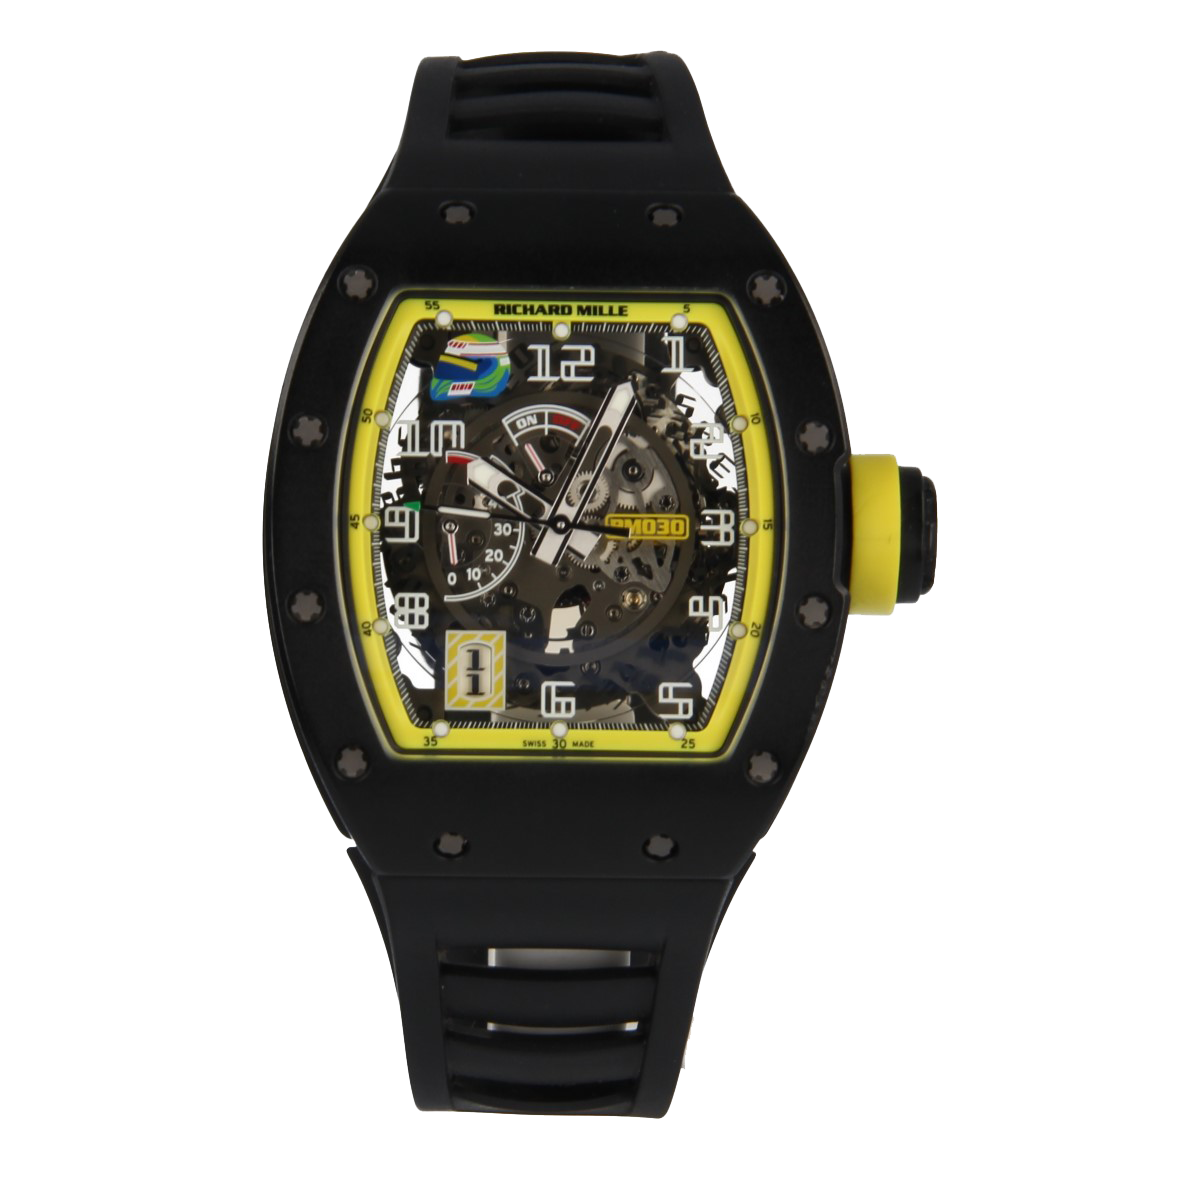 Buy pre-owned Richard Mille watch, AP Watches